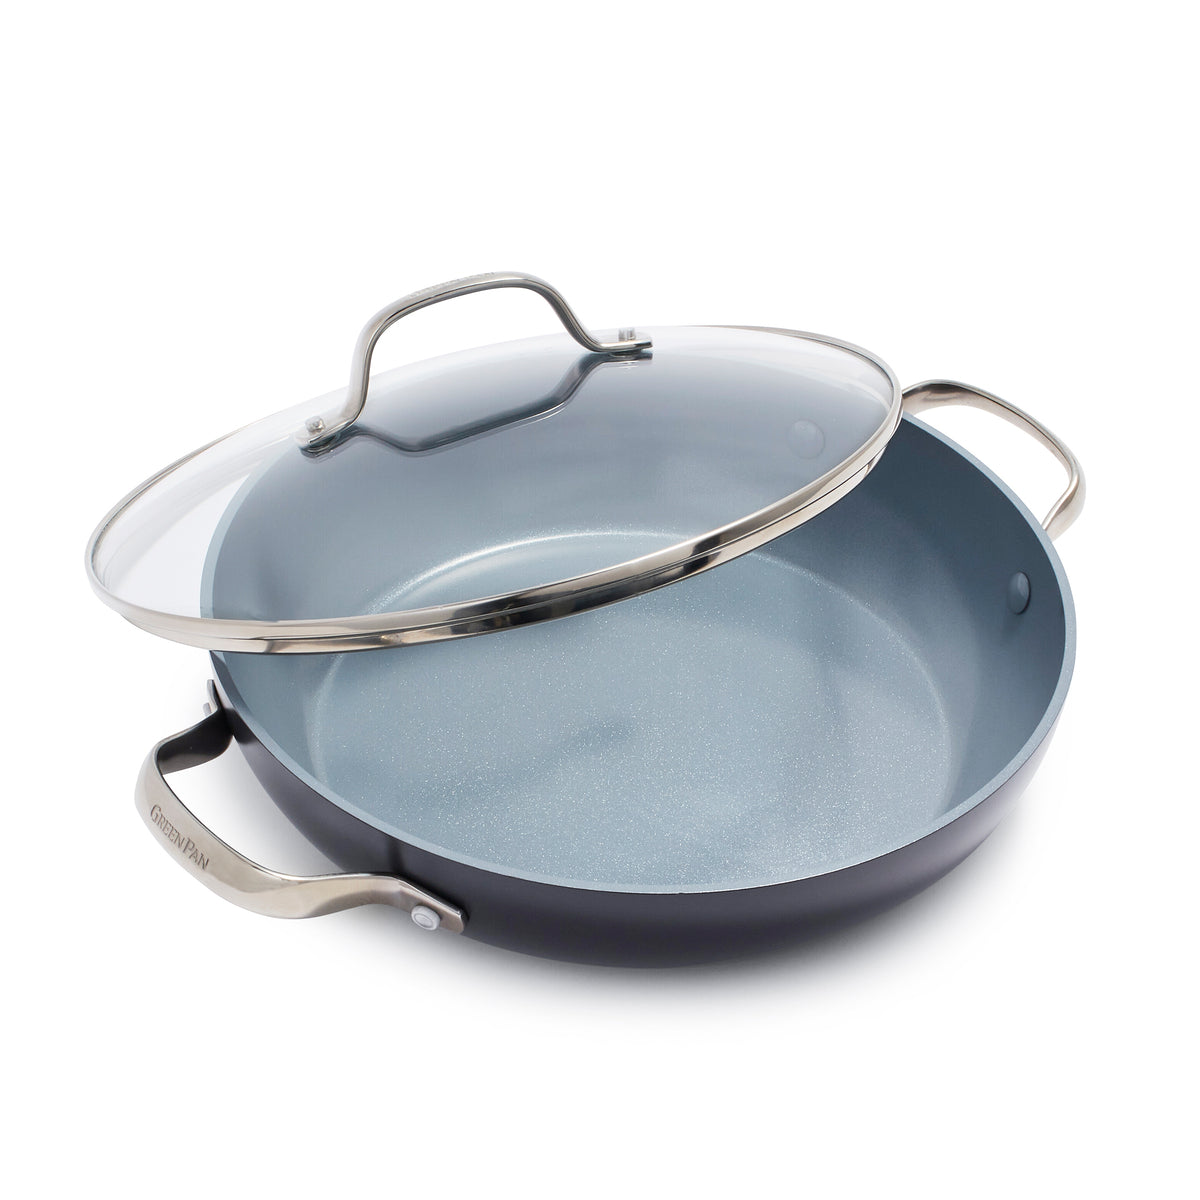 Valencia Pro Ceramic Nonstick 11 Everyday Pan with Lid